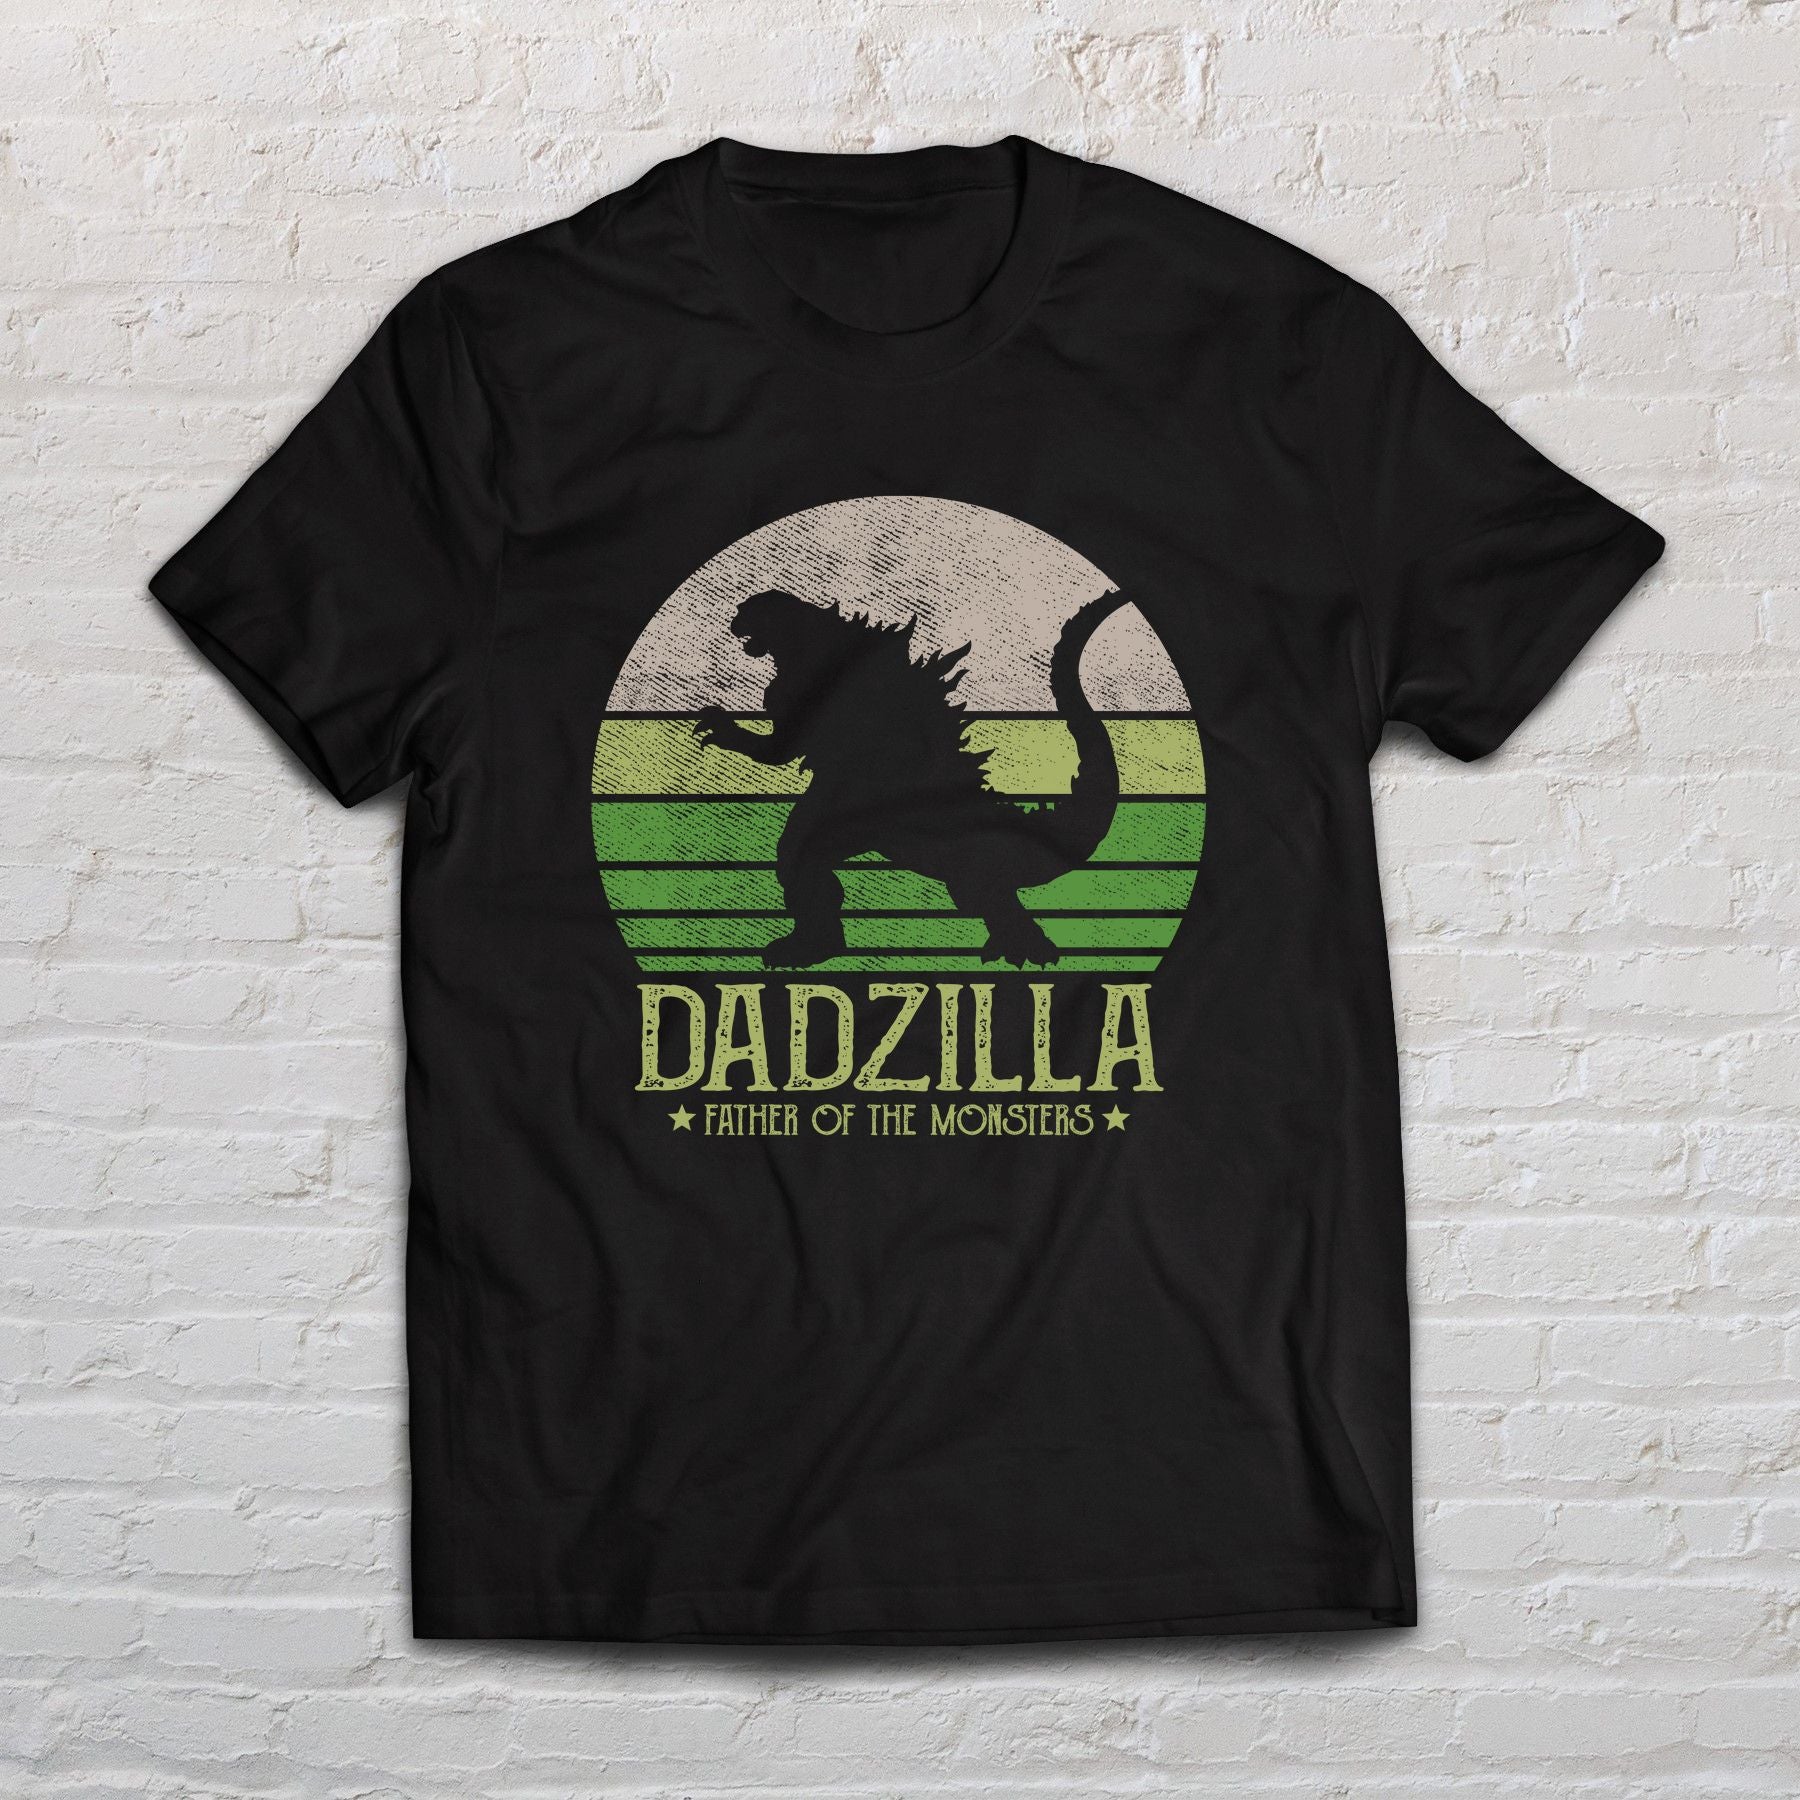 Dadzilla father of the monsters shirt funny dad tee black navy dark heather-Black-Family-Gift-Planet